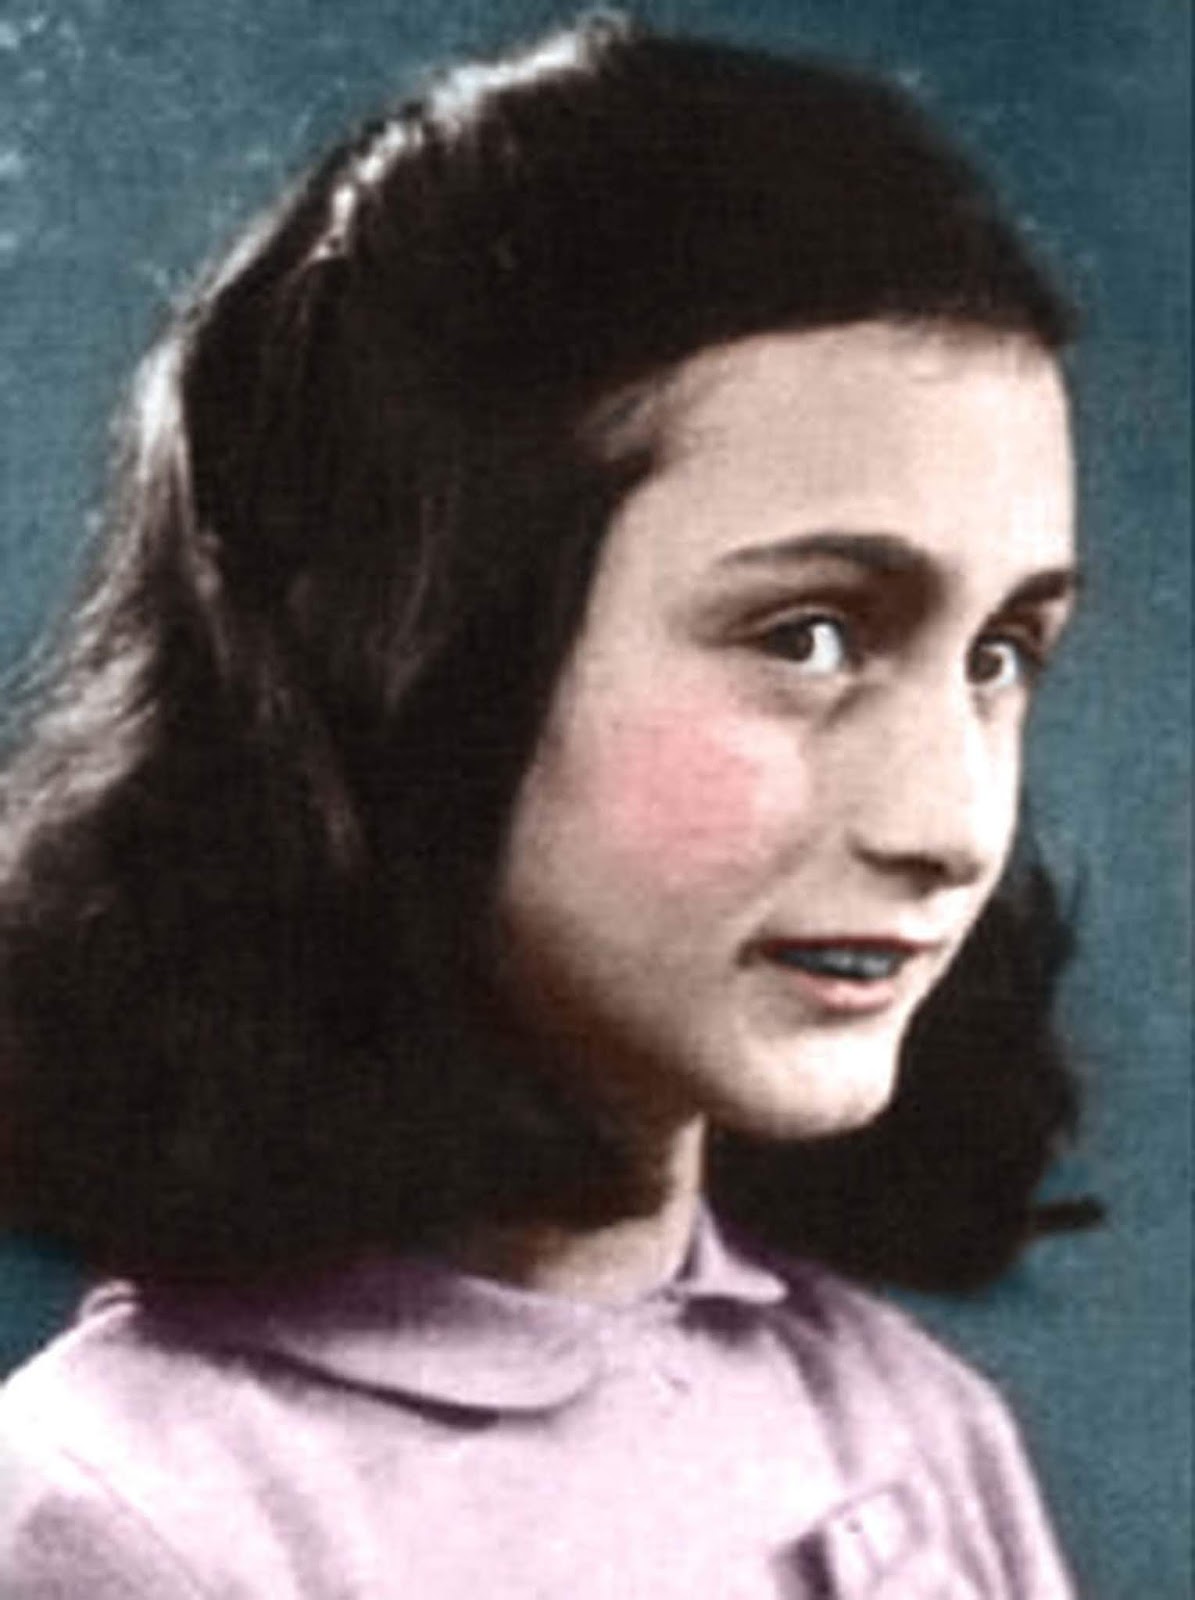 Anne Frank Wallpapers